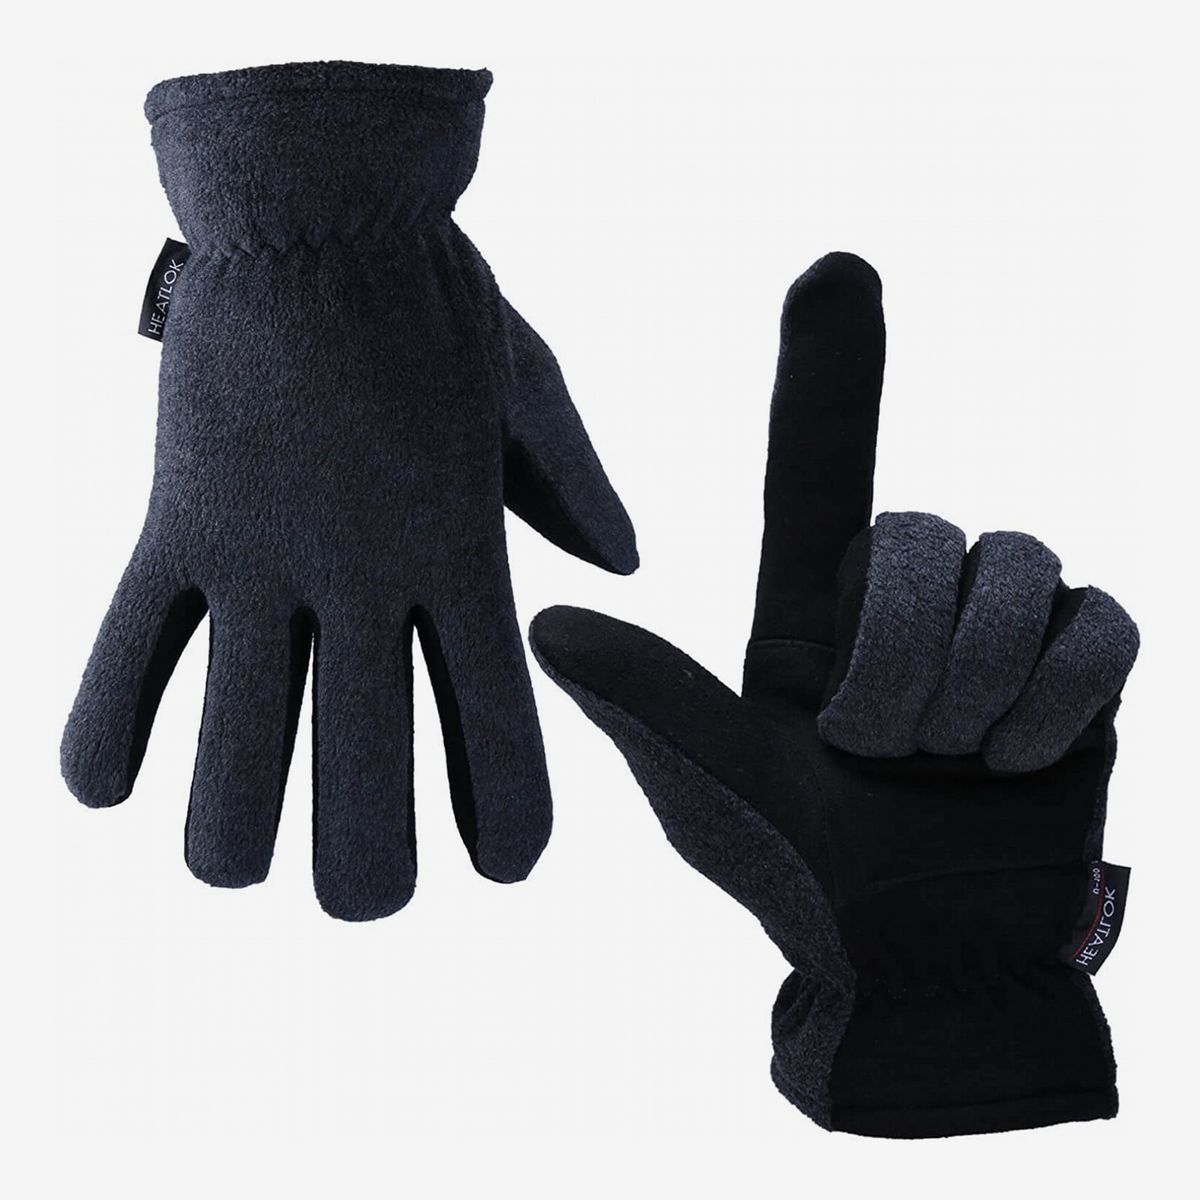 Womens Screen Gloves Sensitive Touch Screen Fingers Gloves Winter Windproof Warm Gloves Warmer Touchscreen Mittens Thick Fleece Lined Gloves for Ladies Girls 